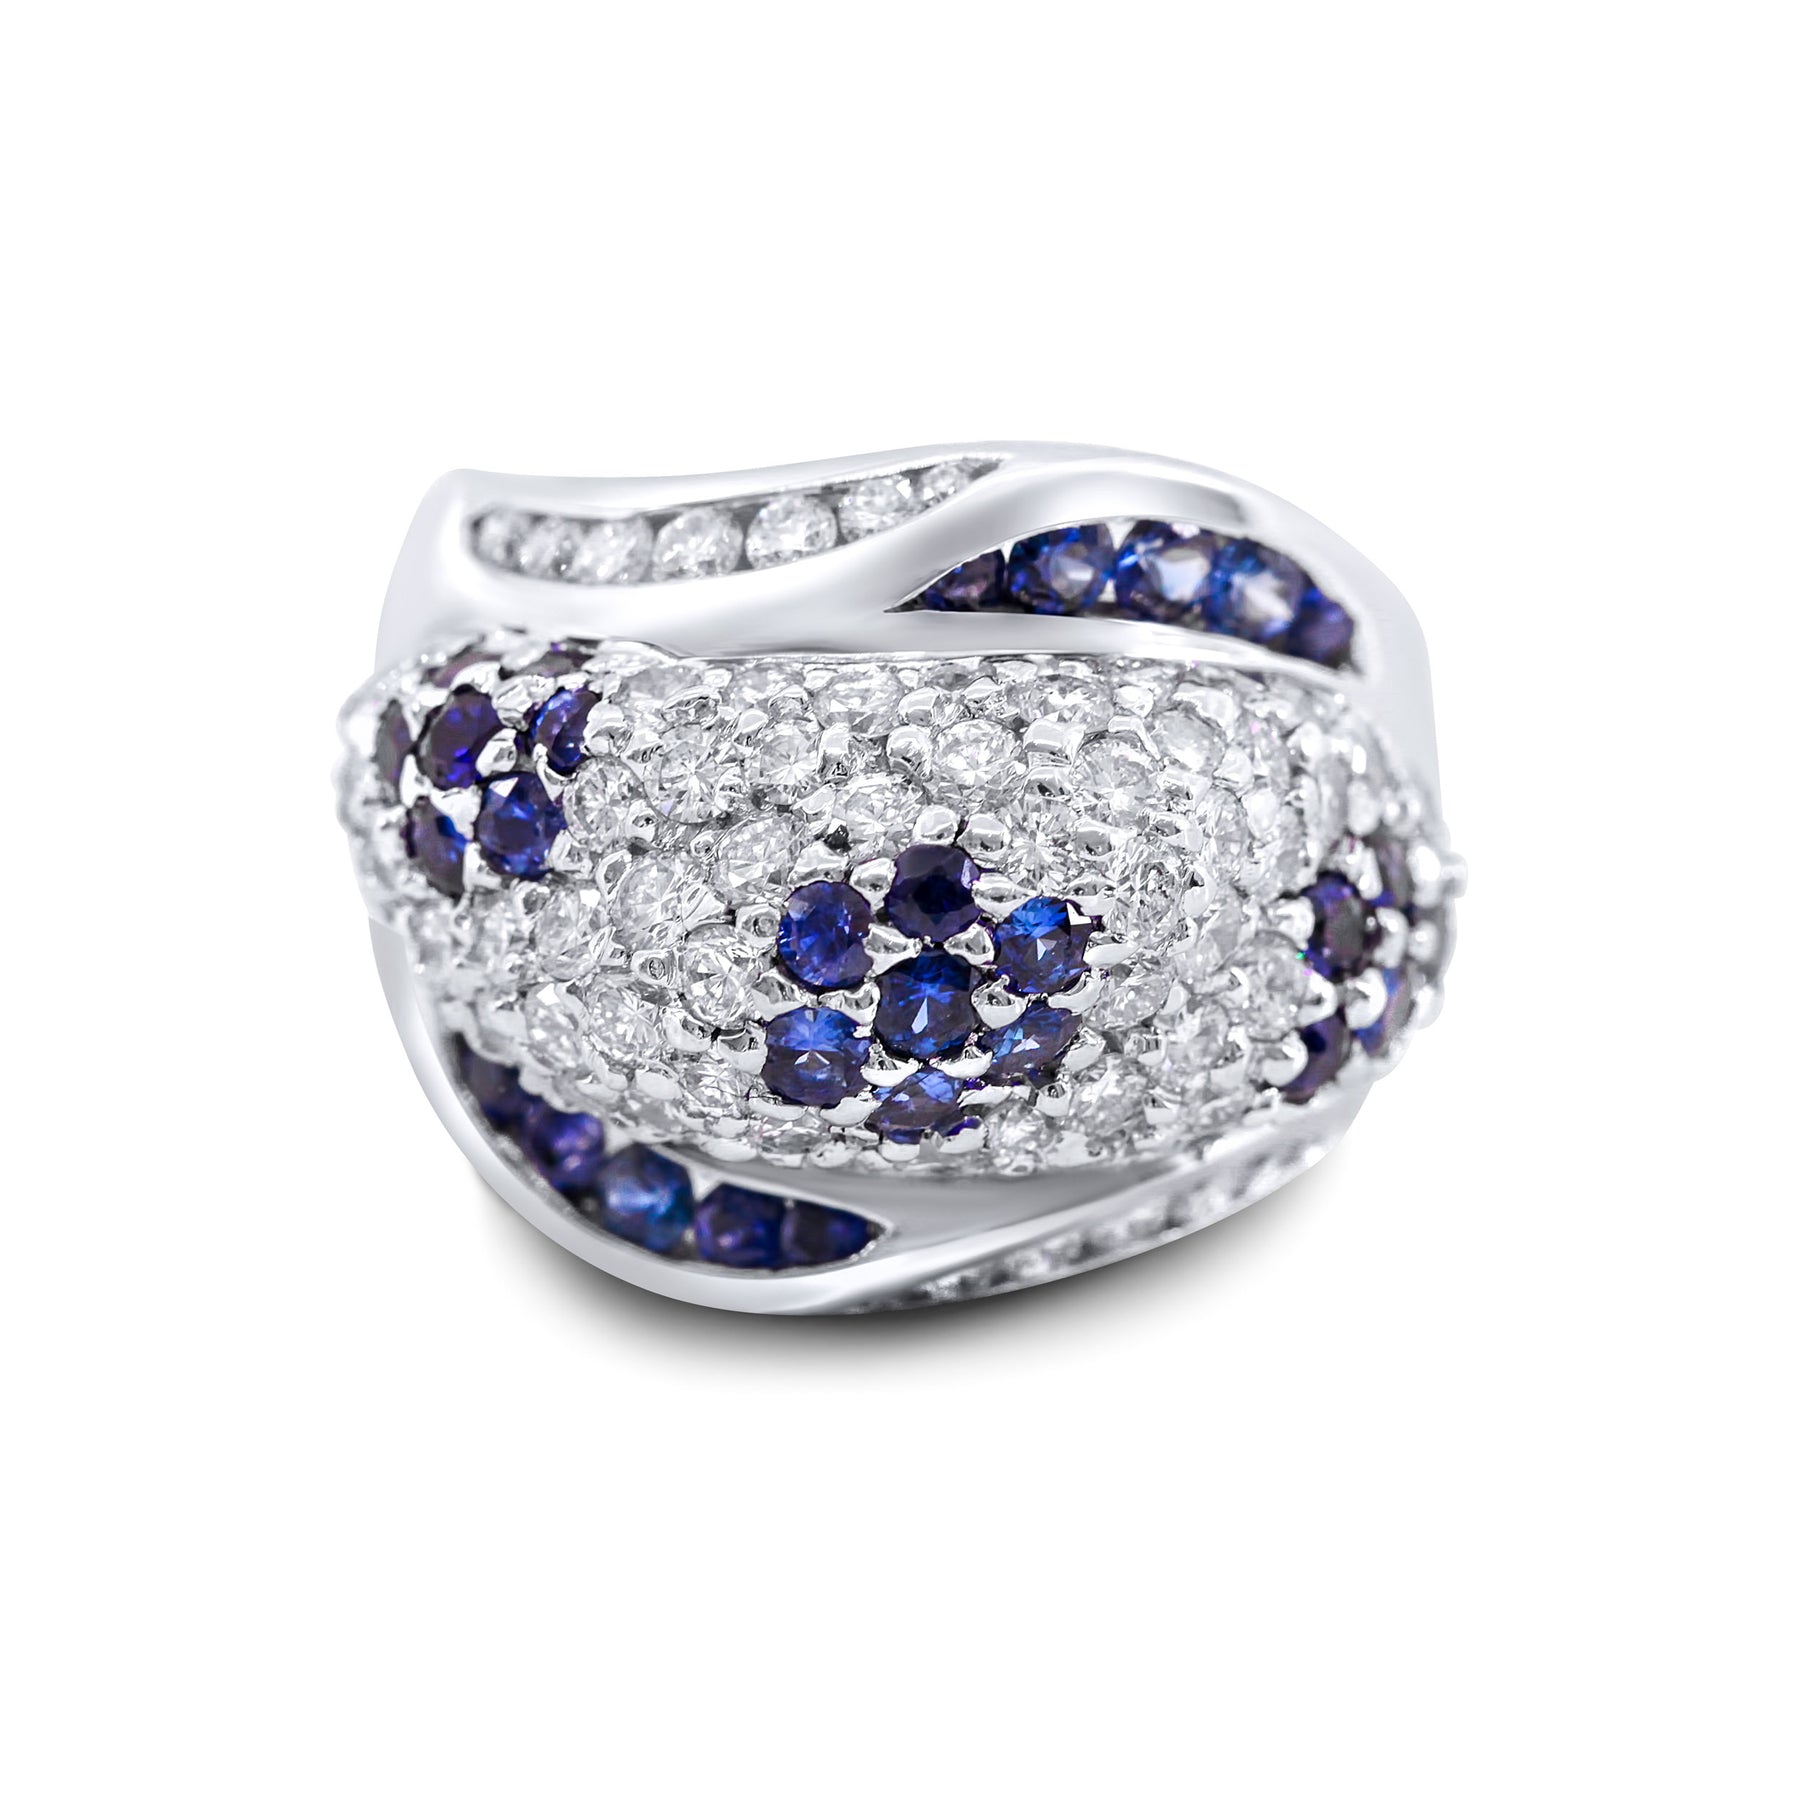 Domed Sapphire Ring